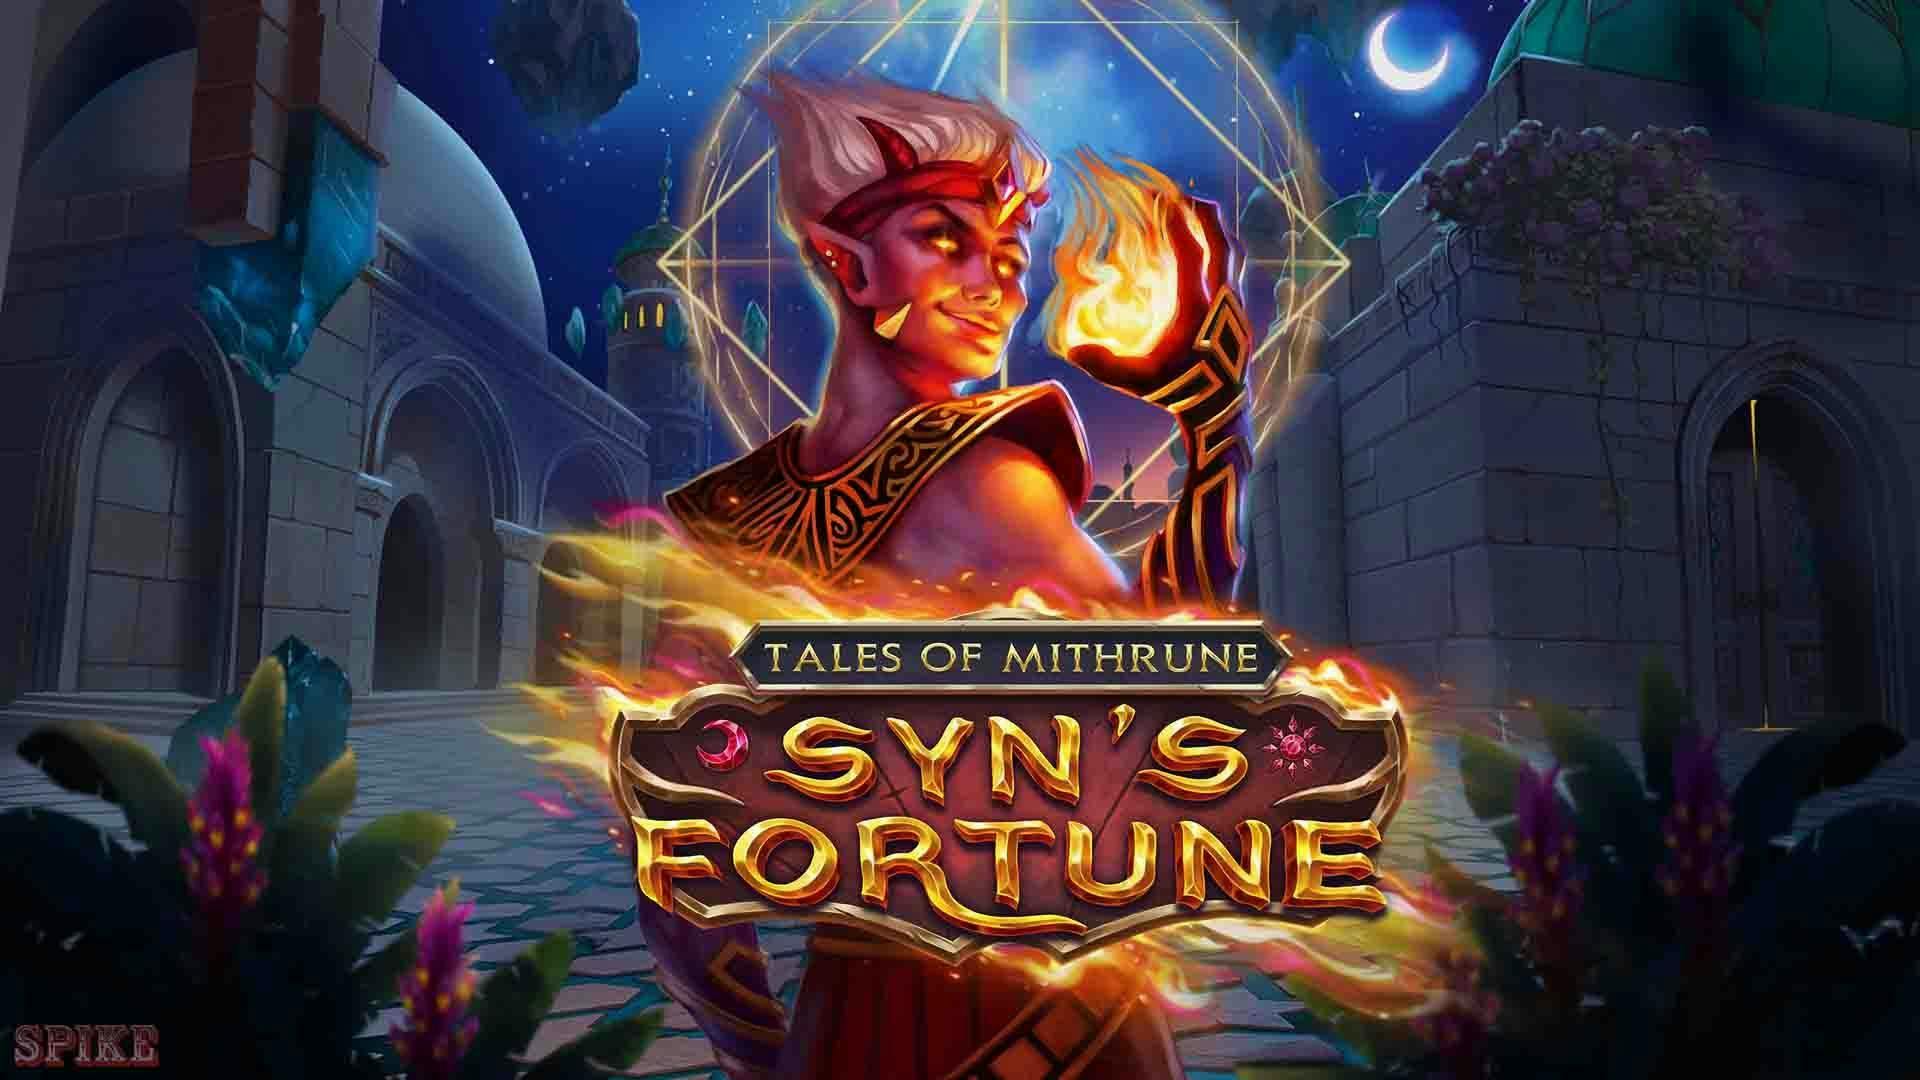  Tales of Mithrune Syn's Fortune Slot Gratis